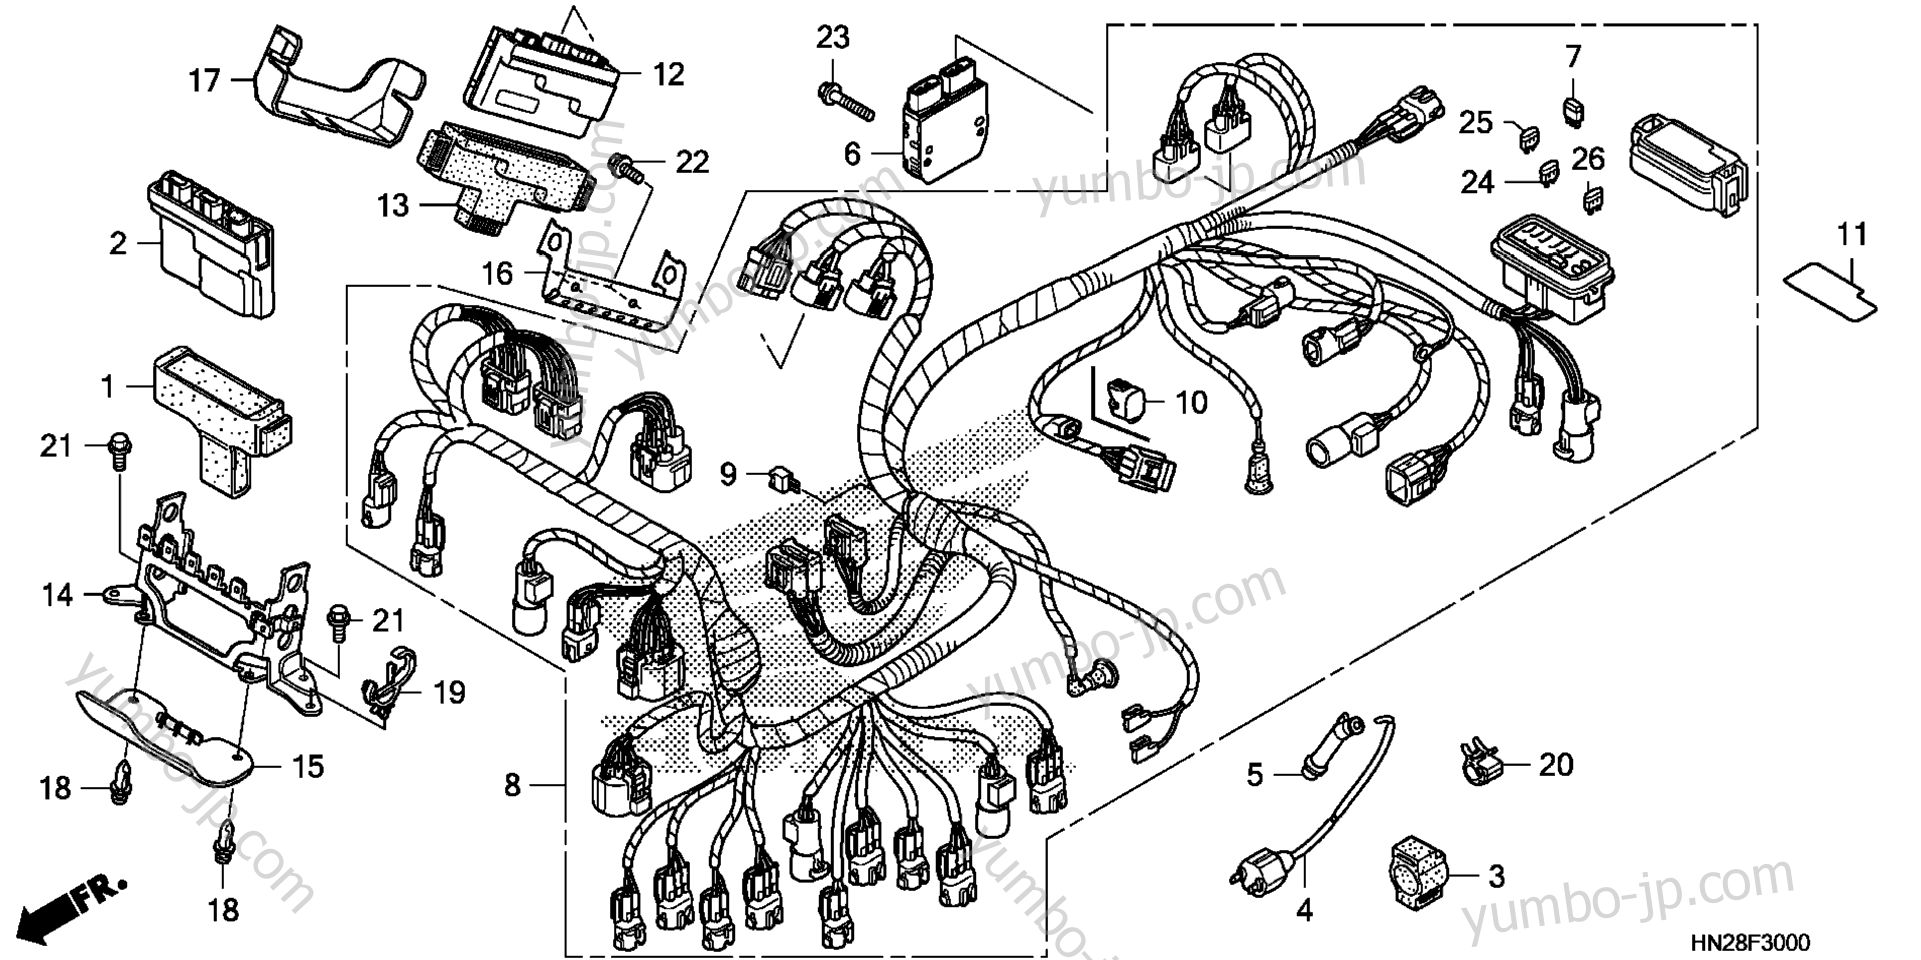 WIRE HARNESS for ATVs HONDA TRX500FA A 2009 year